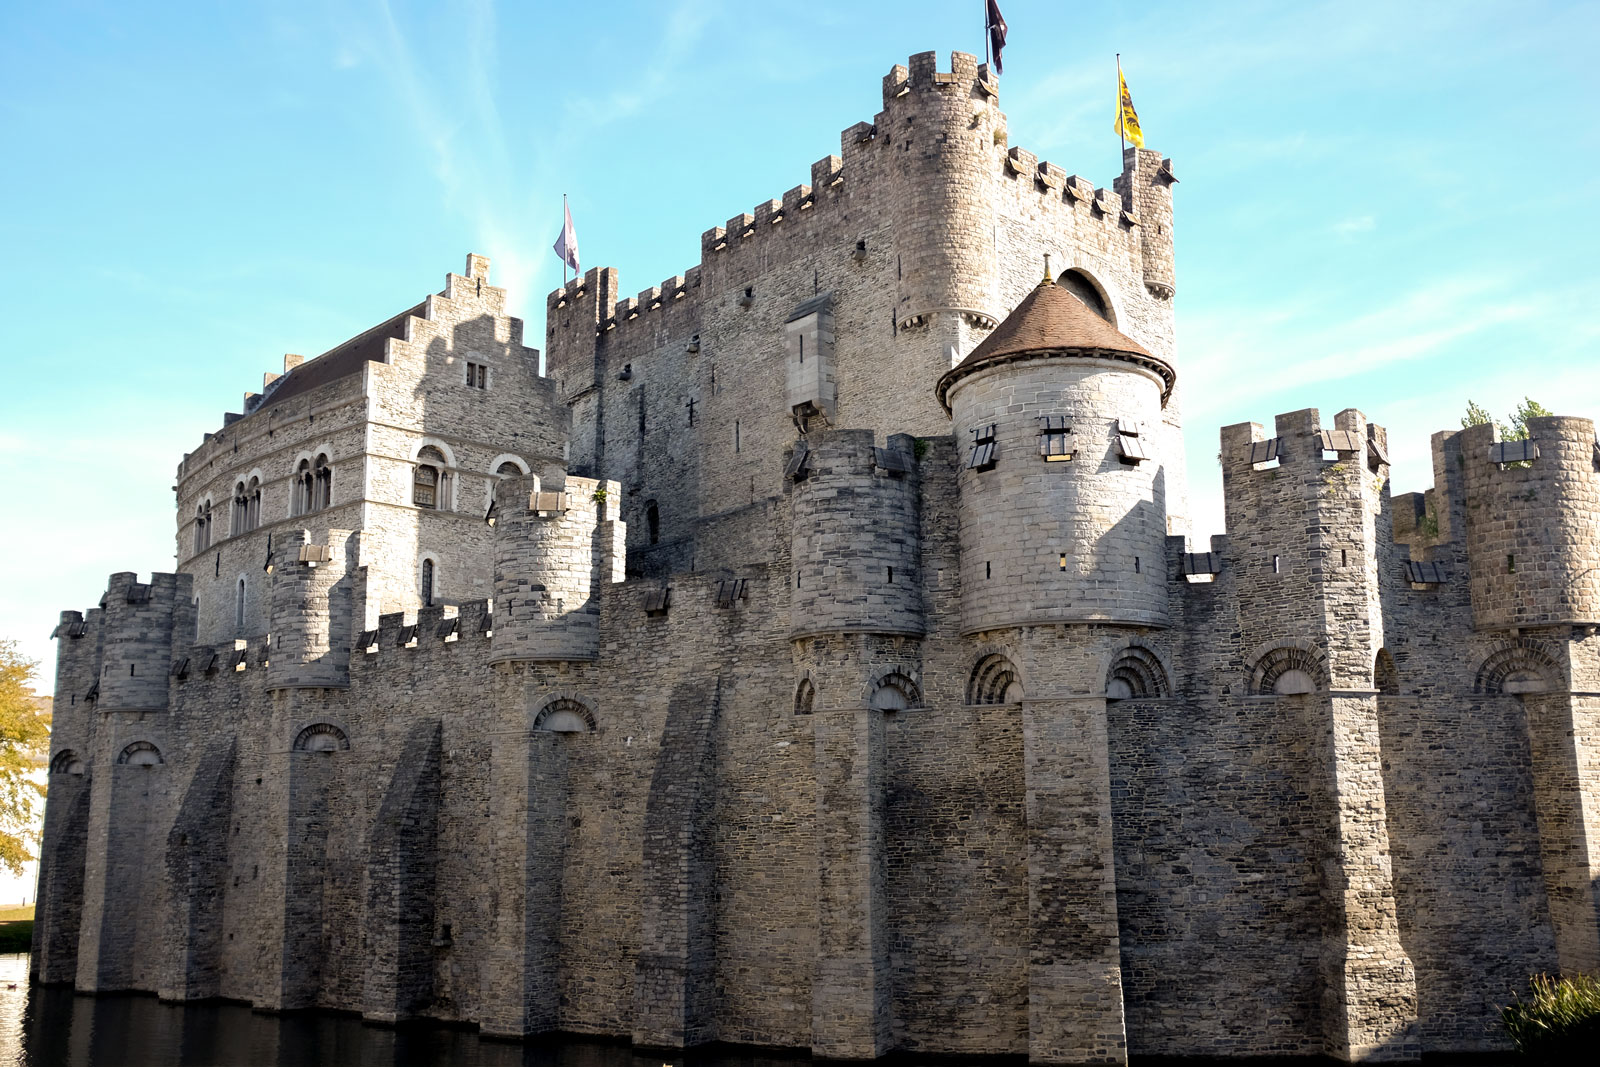 The exterior of the Gravensteen